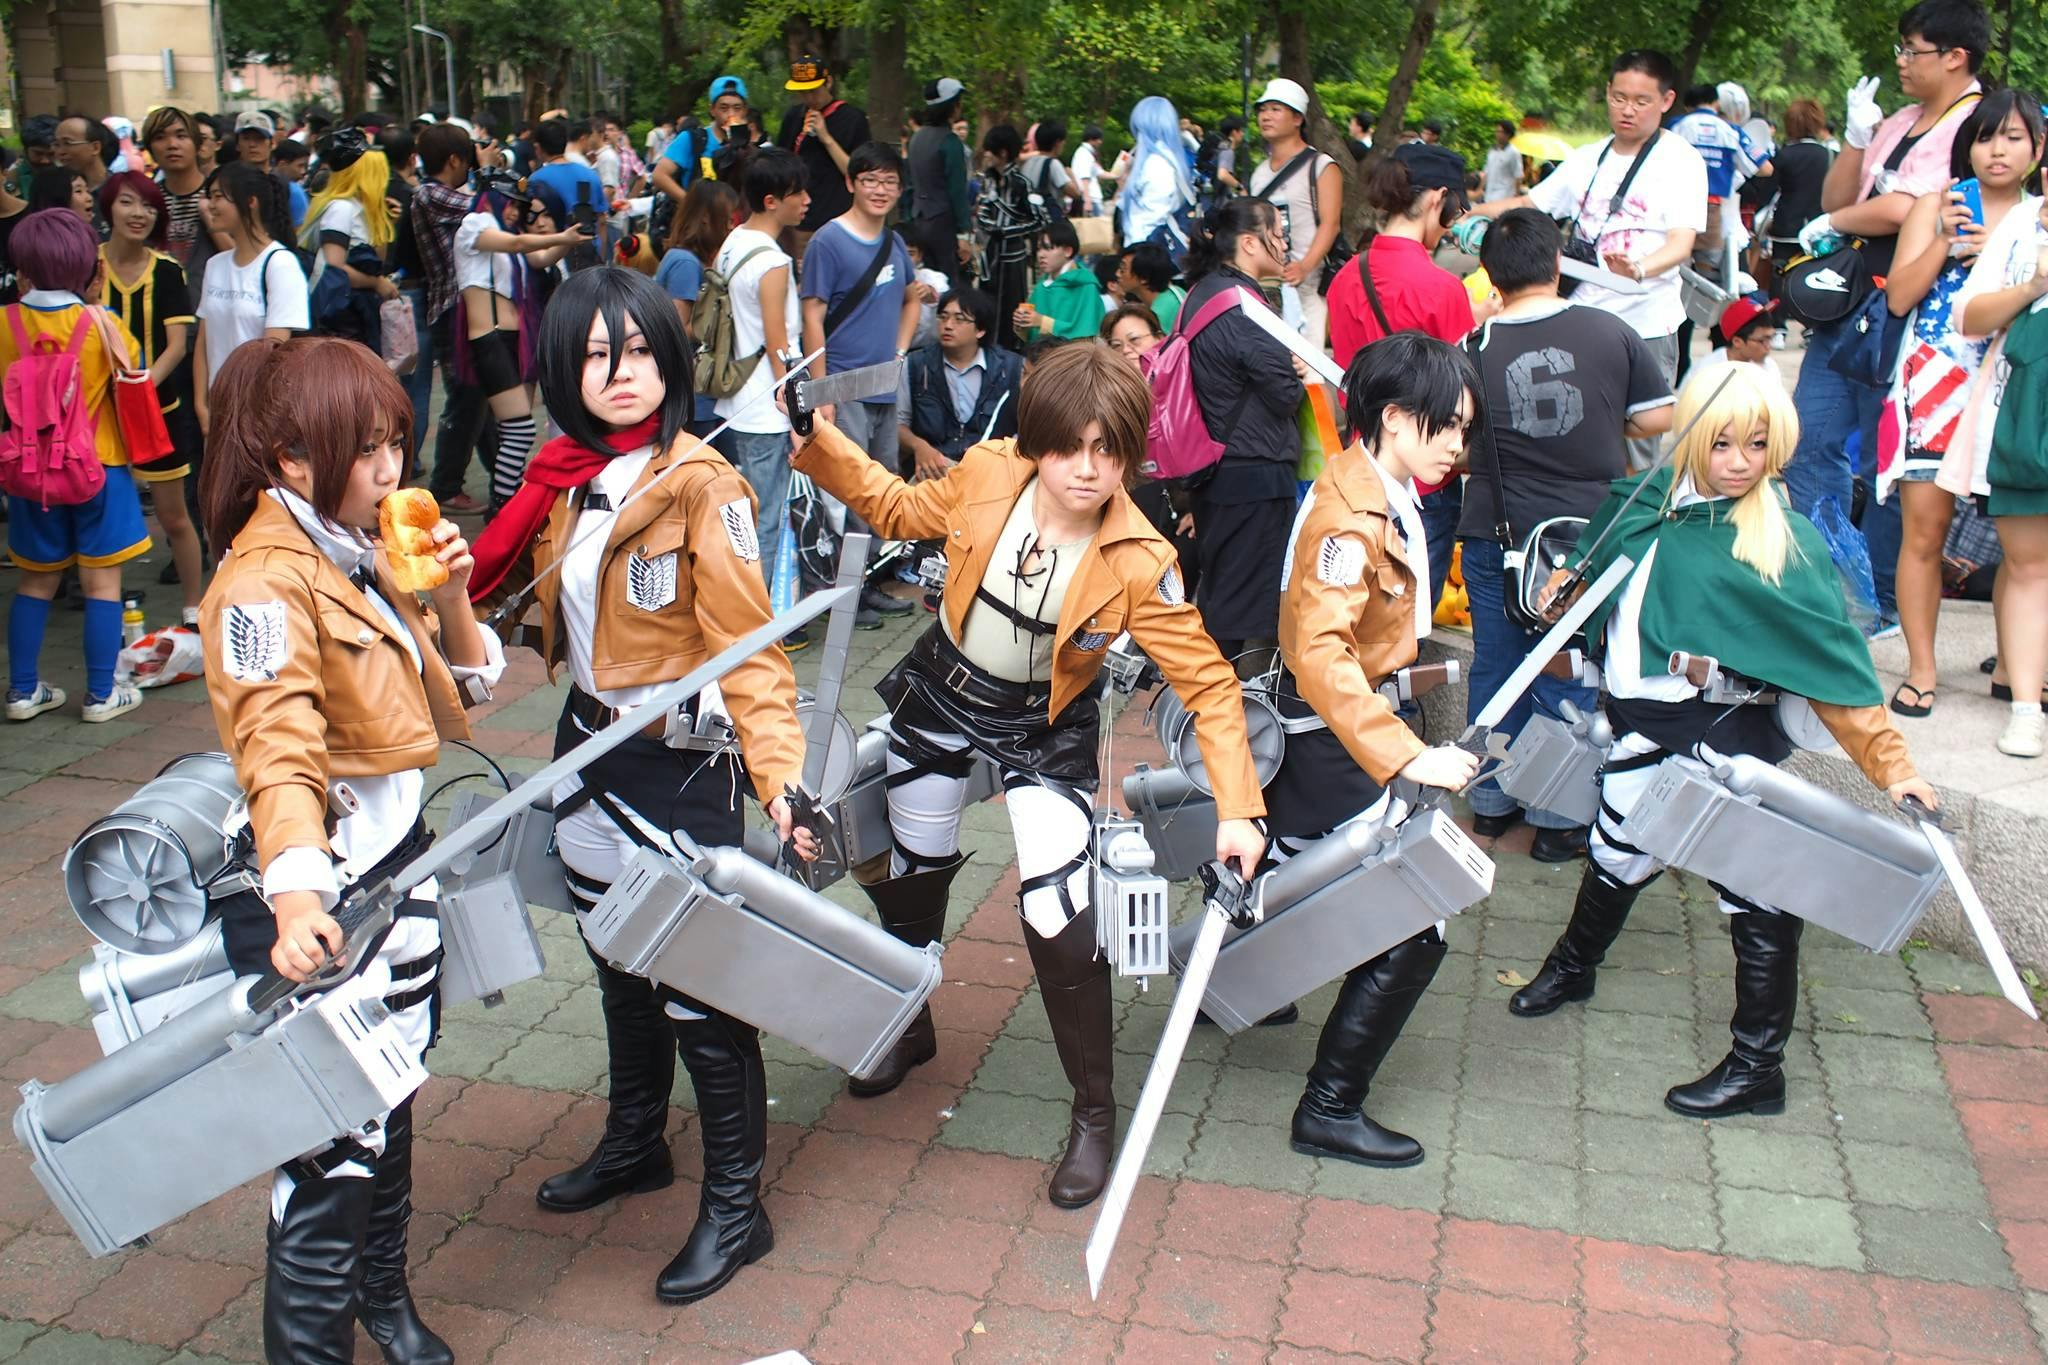 'Attack on Titan' and 'Evangelion' Are Getting Rides at Japan's